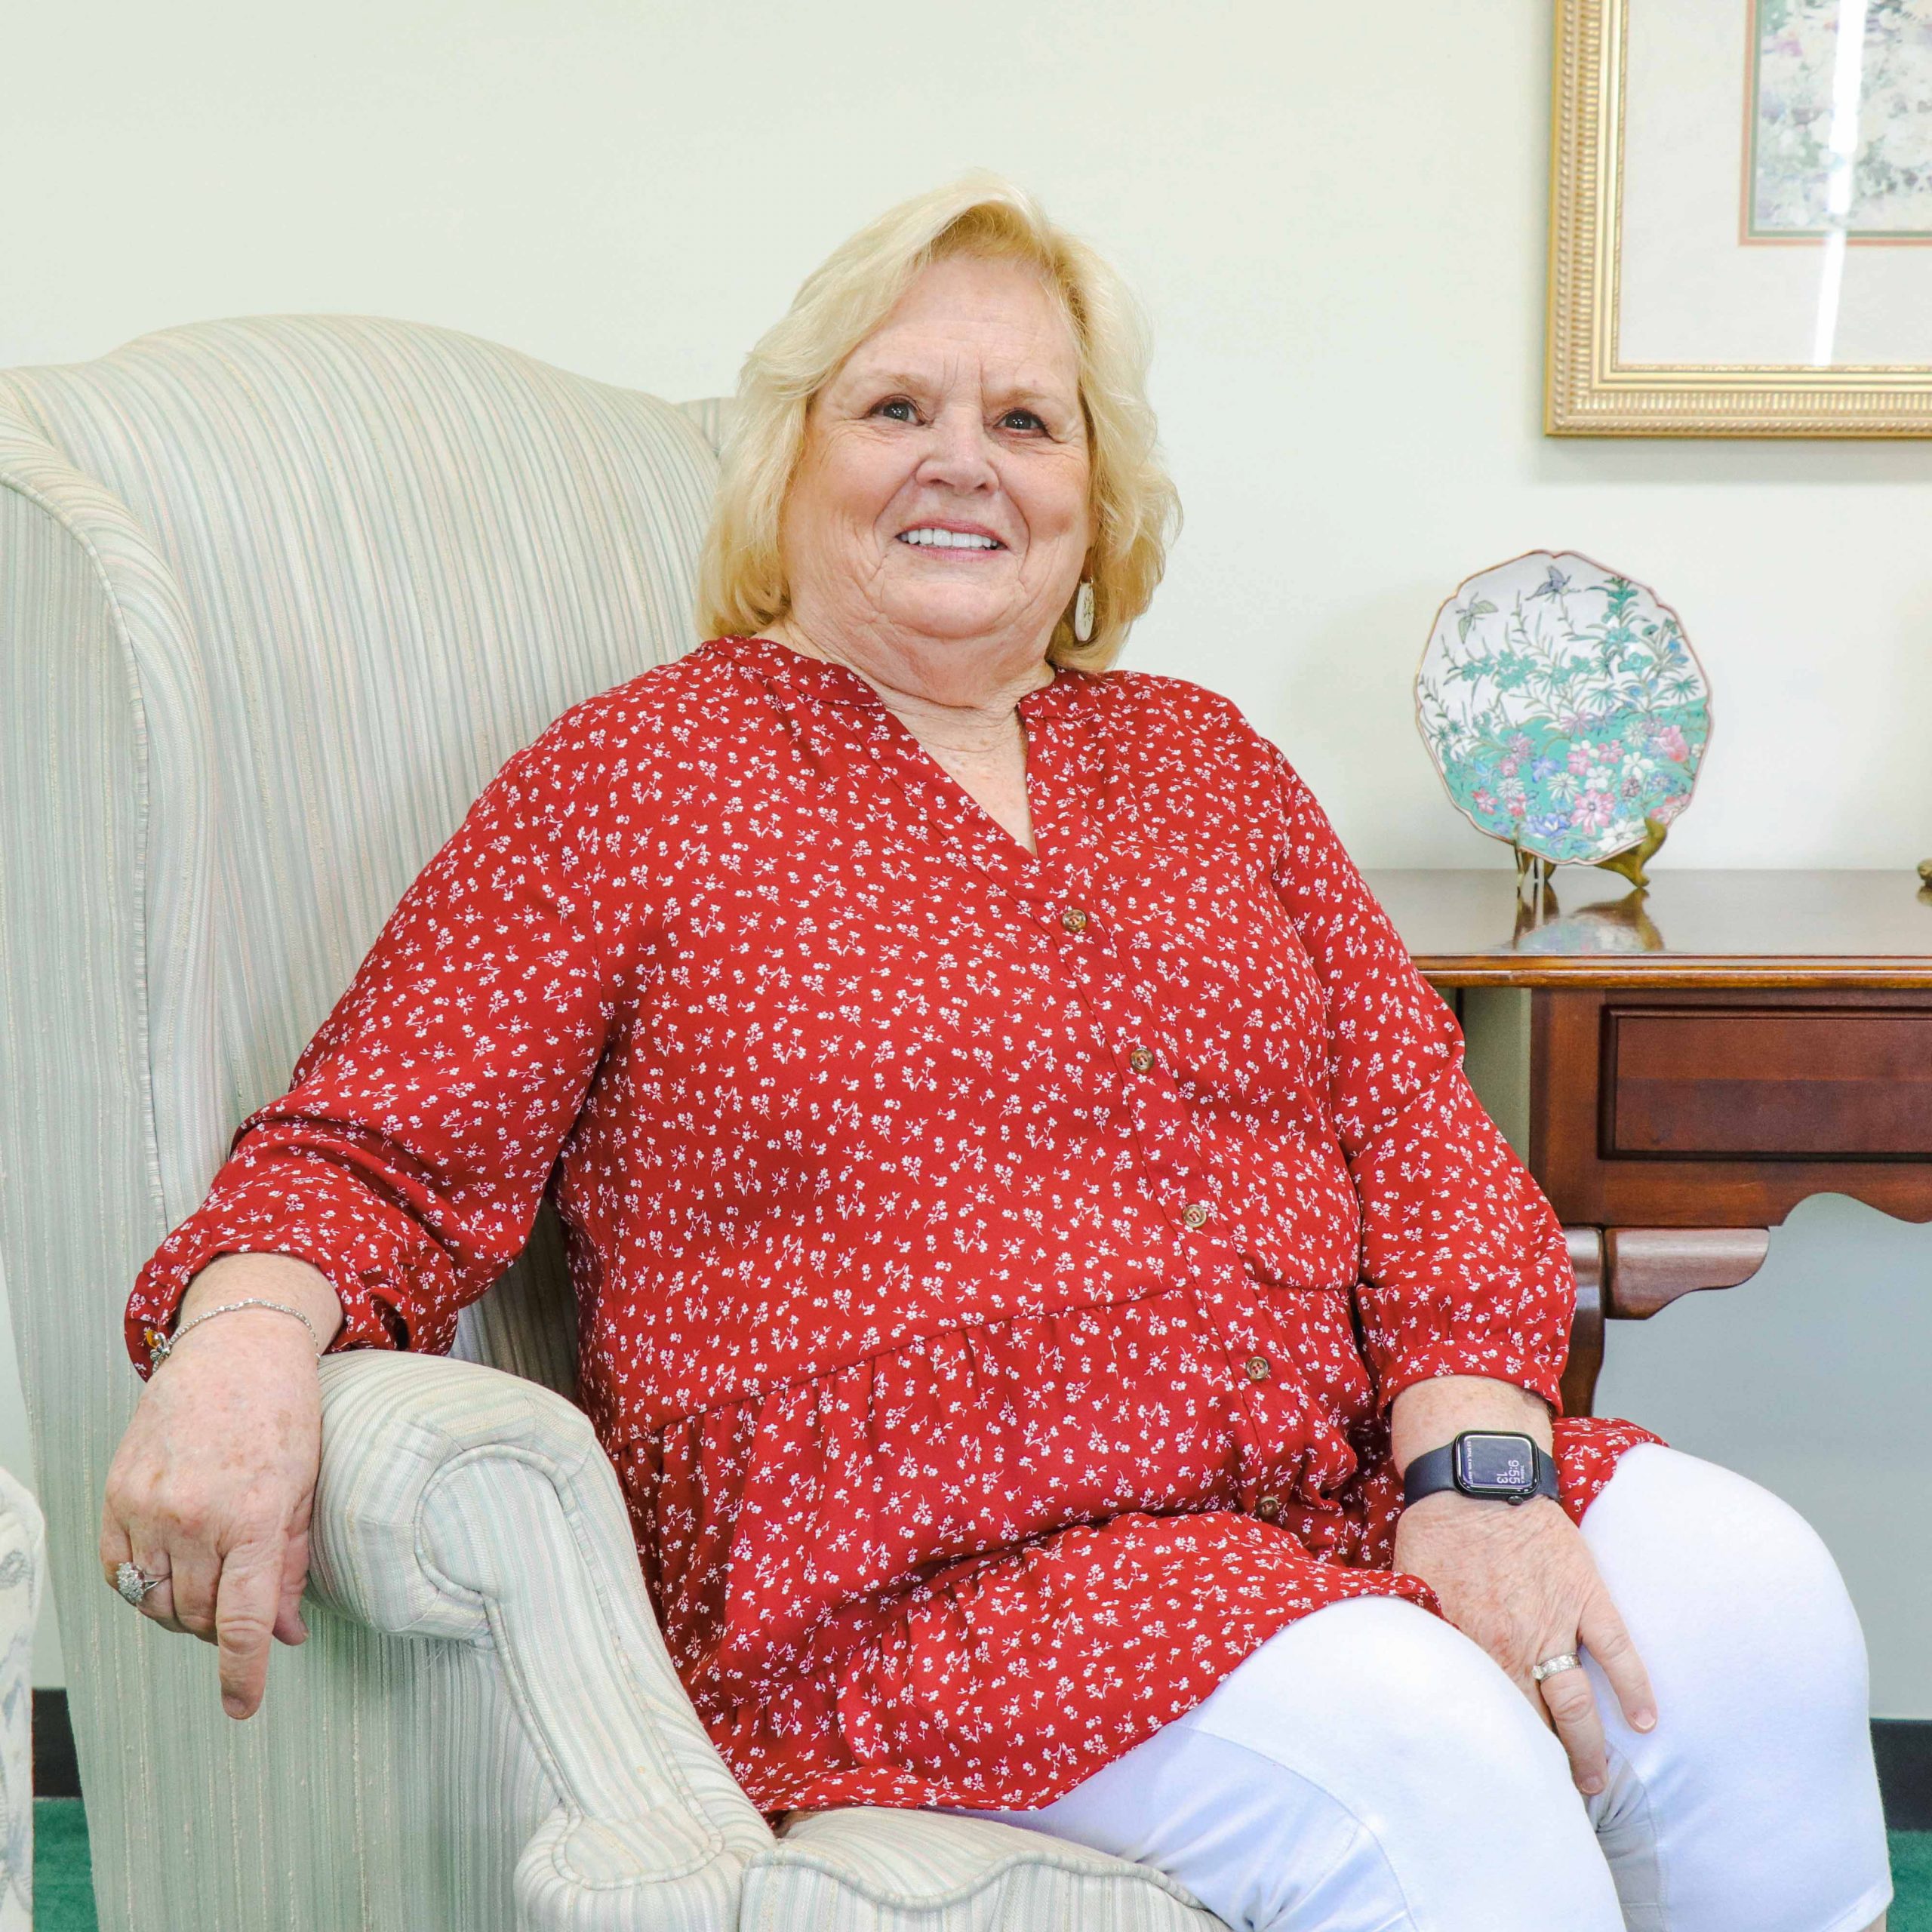 Betty Marlor is the SABQG president wearing a red spotted blouse and sitting in a cozy chair